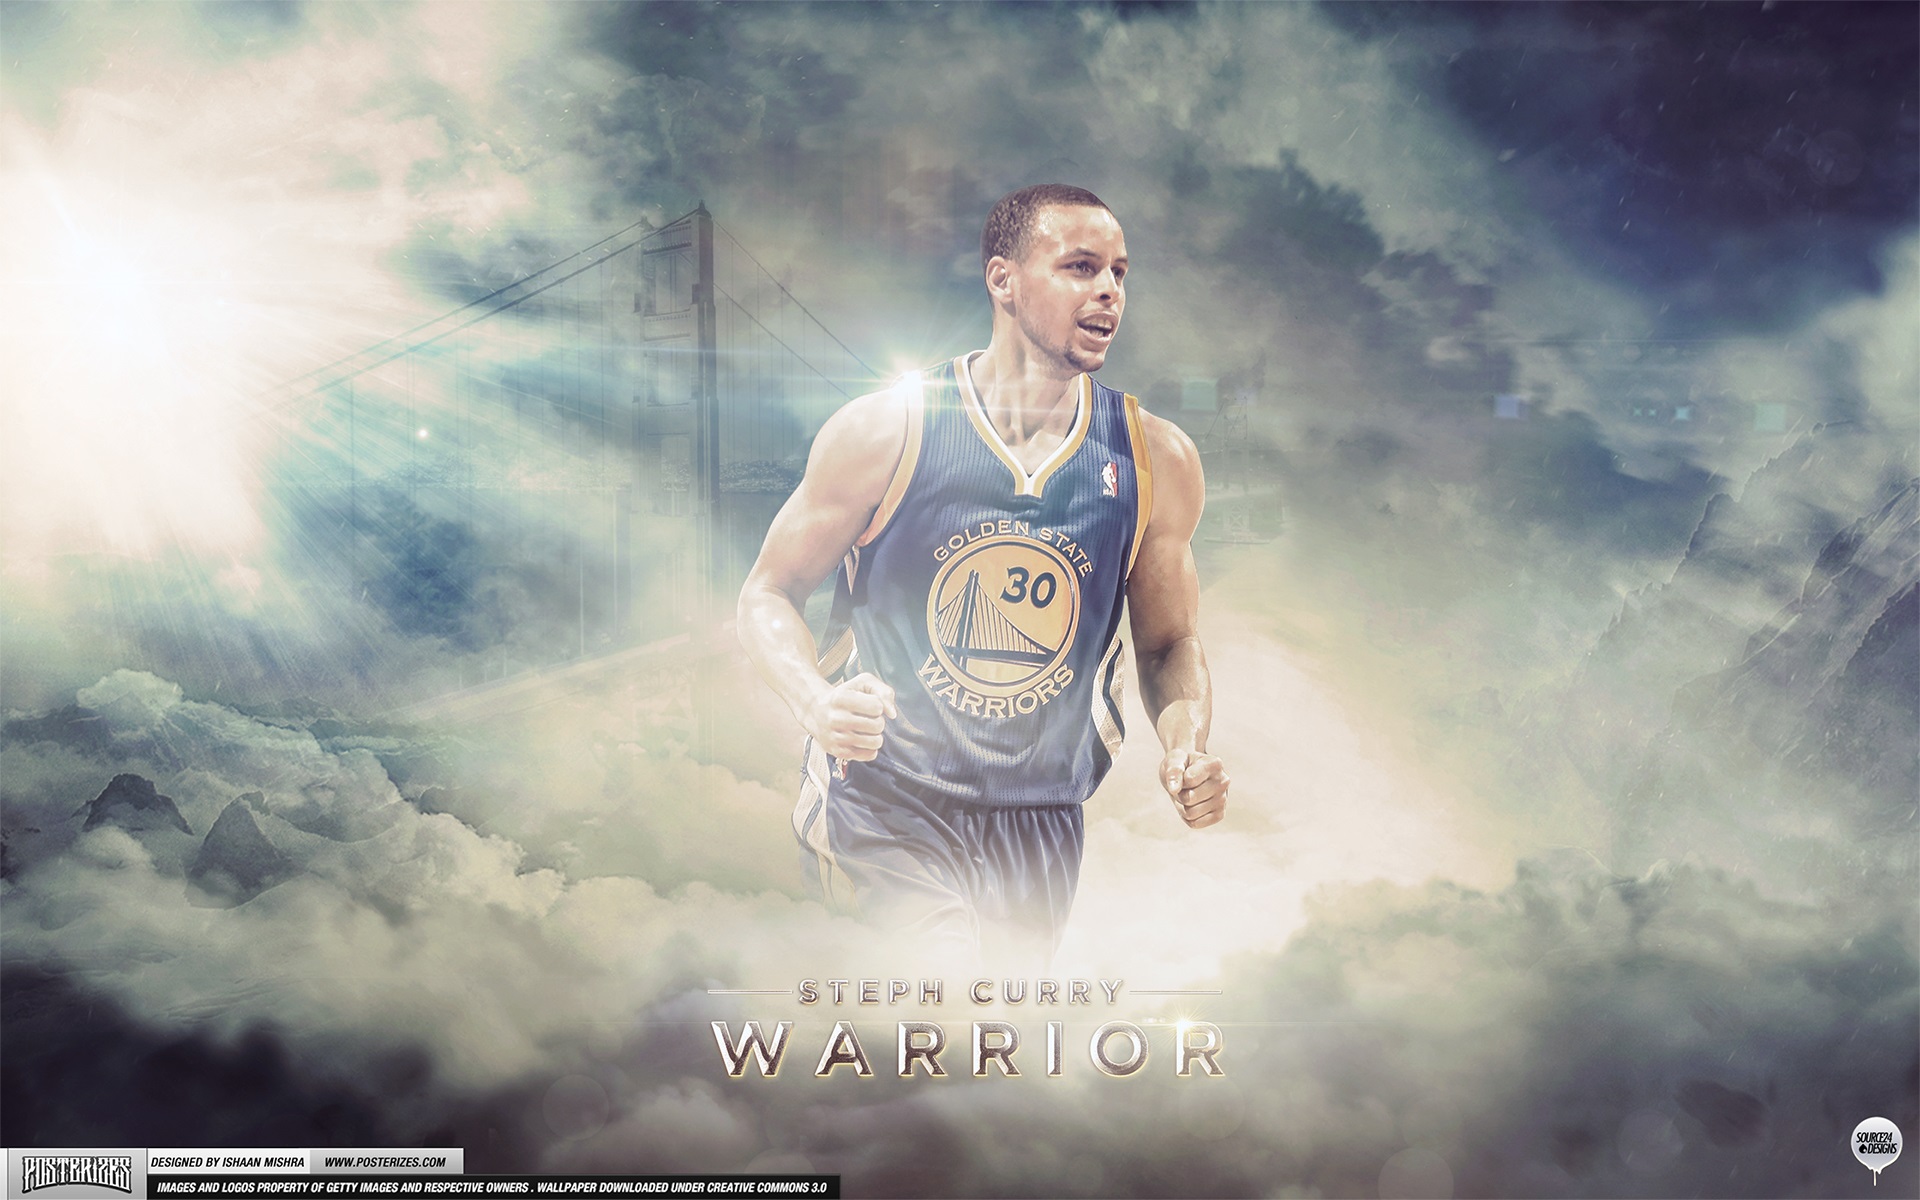 Steph Curry - Basketball Player - Stephen Wallpaper Download